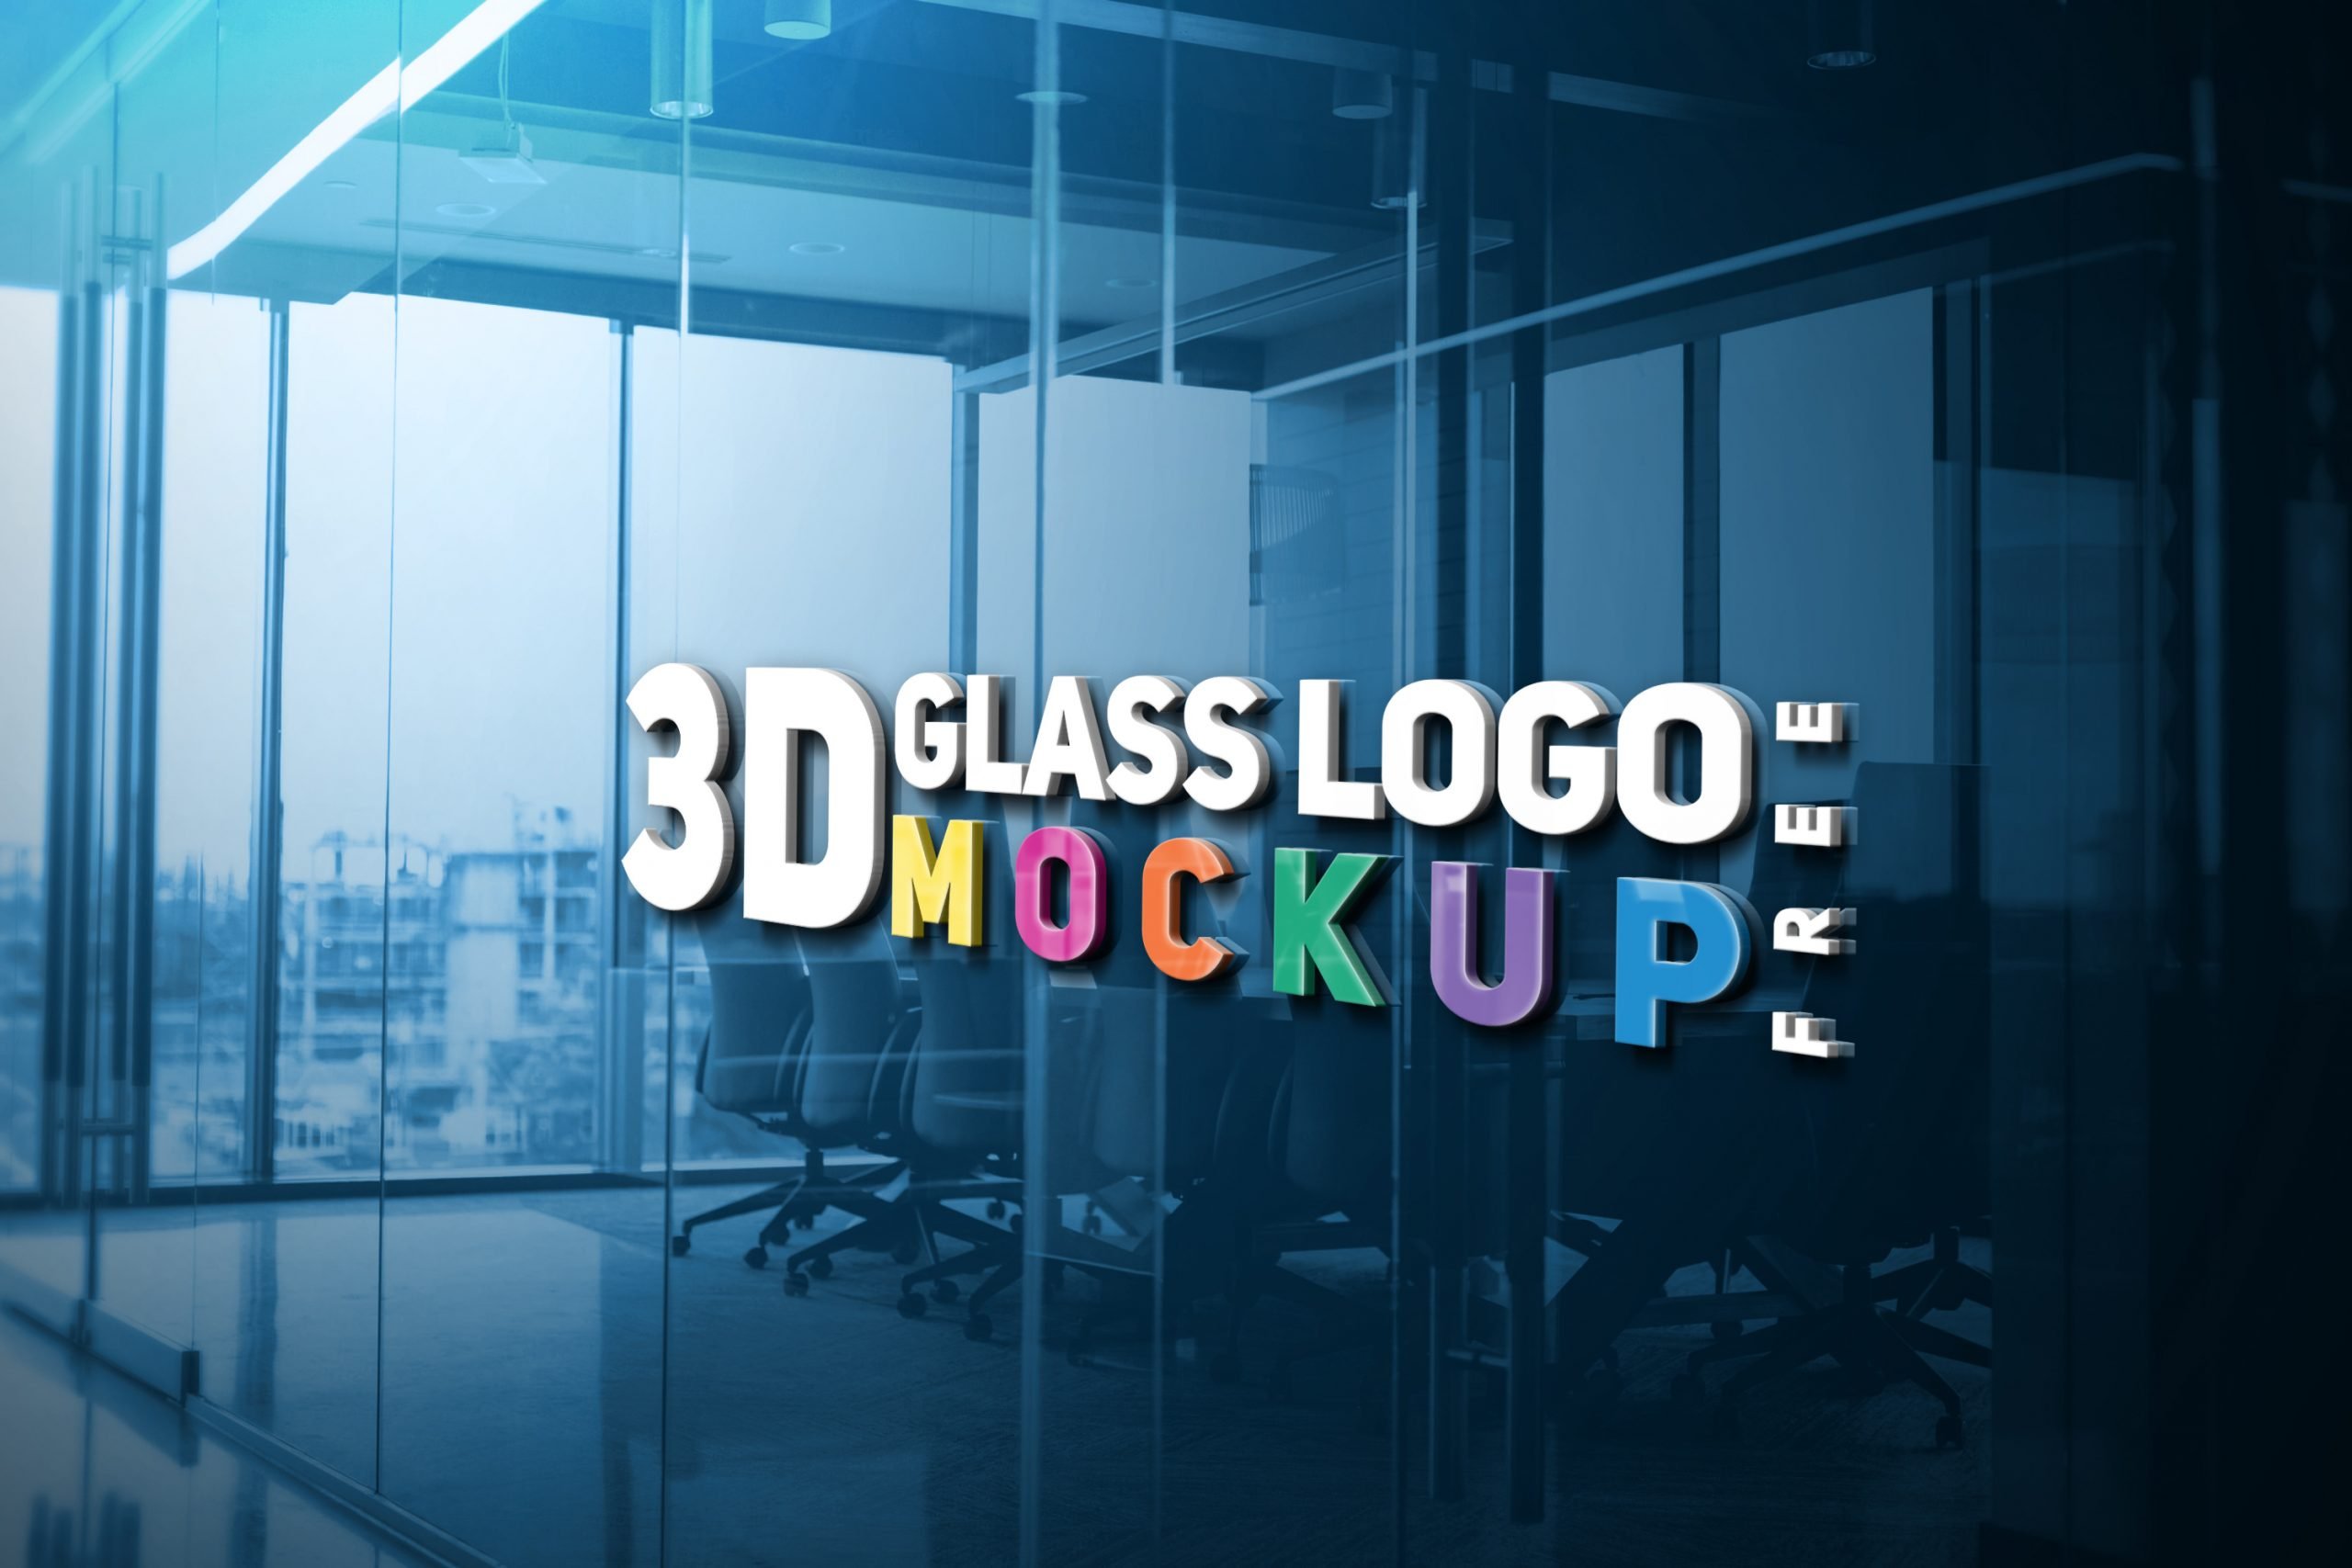 3D Glass Logo Mockup by GraphicsFamily.com